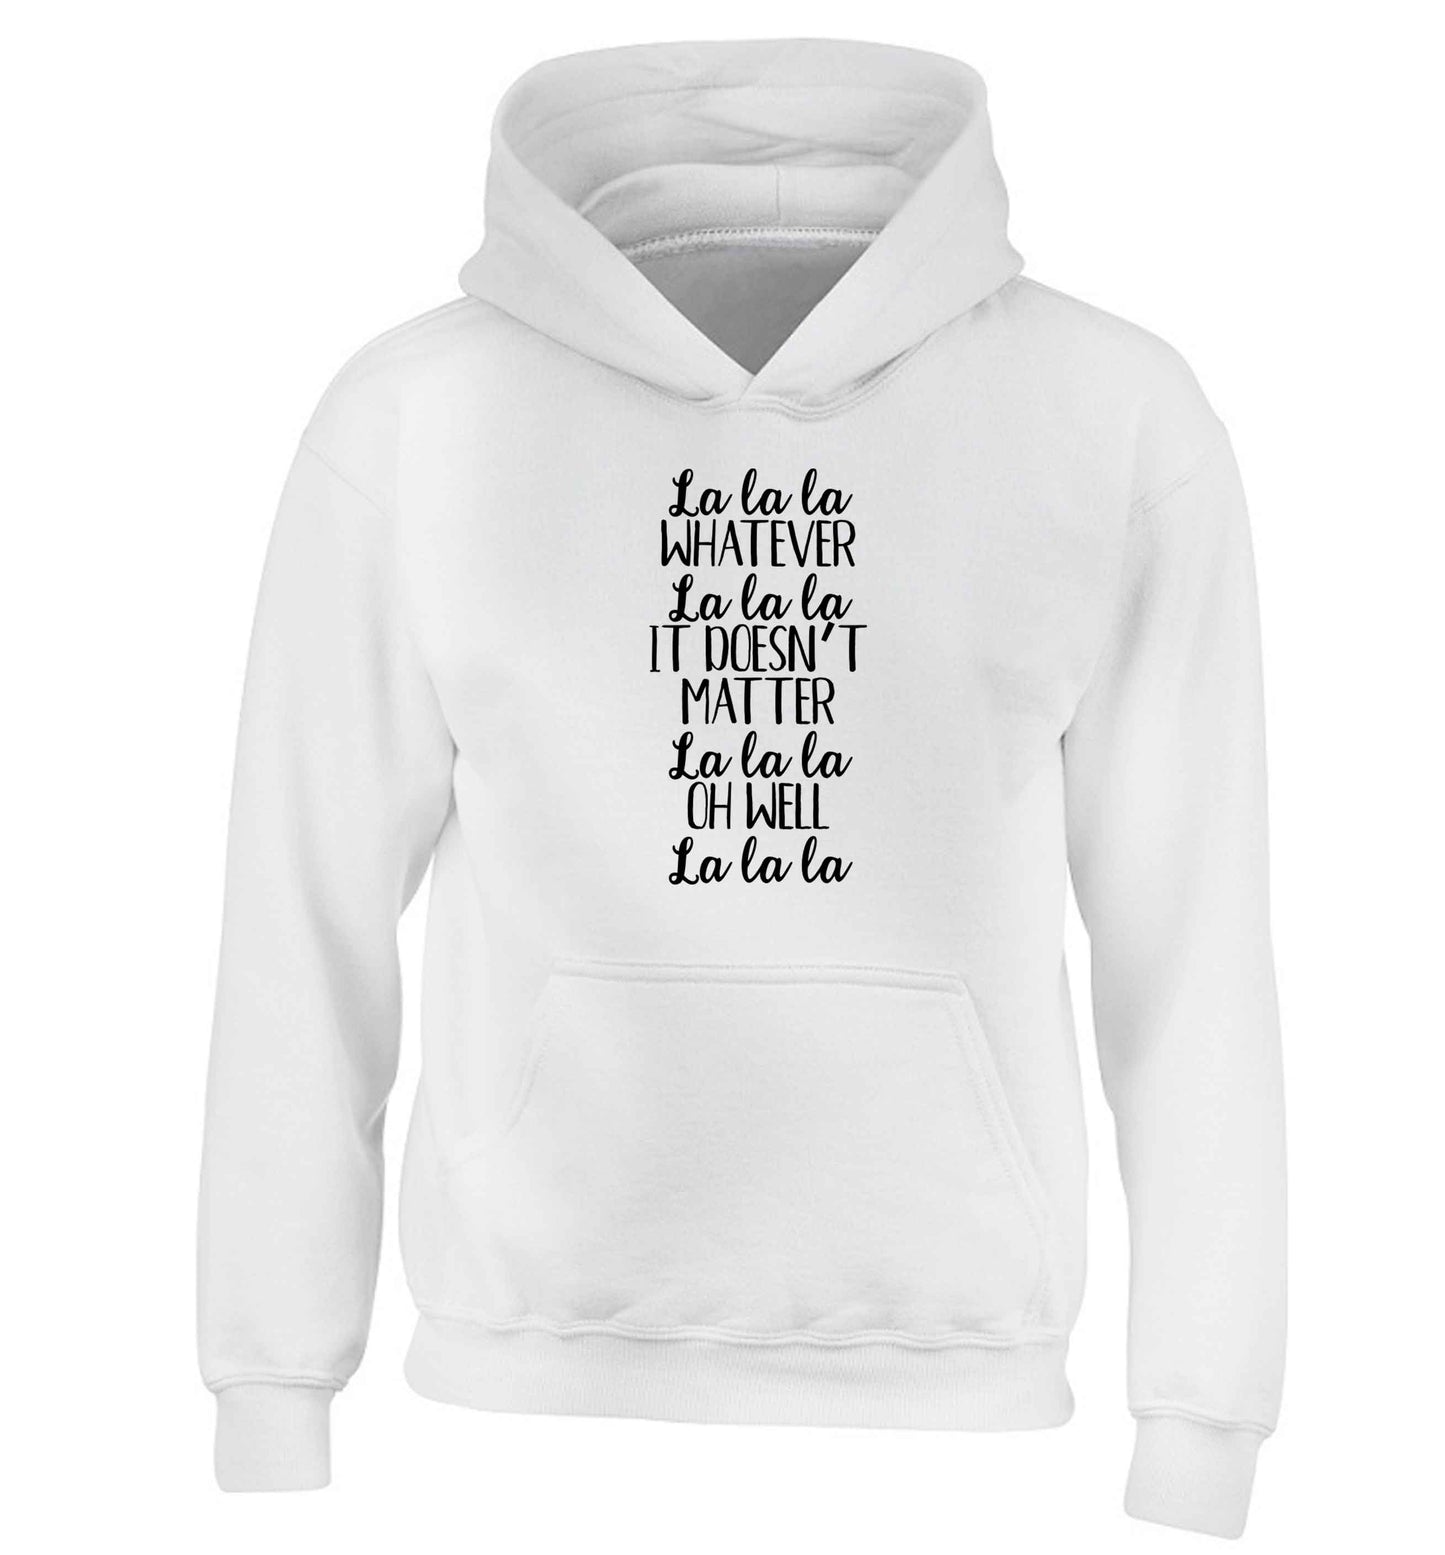 Viral song lyrics - check! Gen z babies where you at? children's white hoodie 12-13 Years